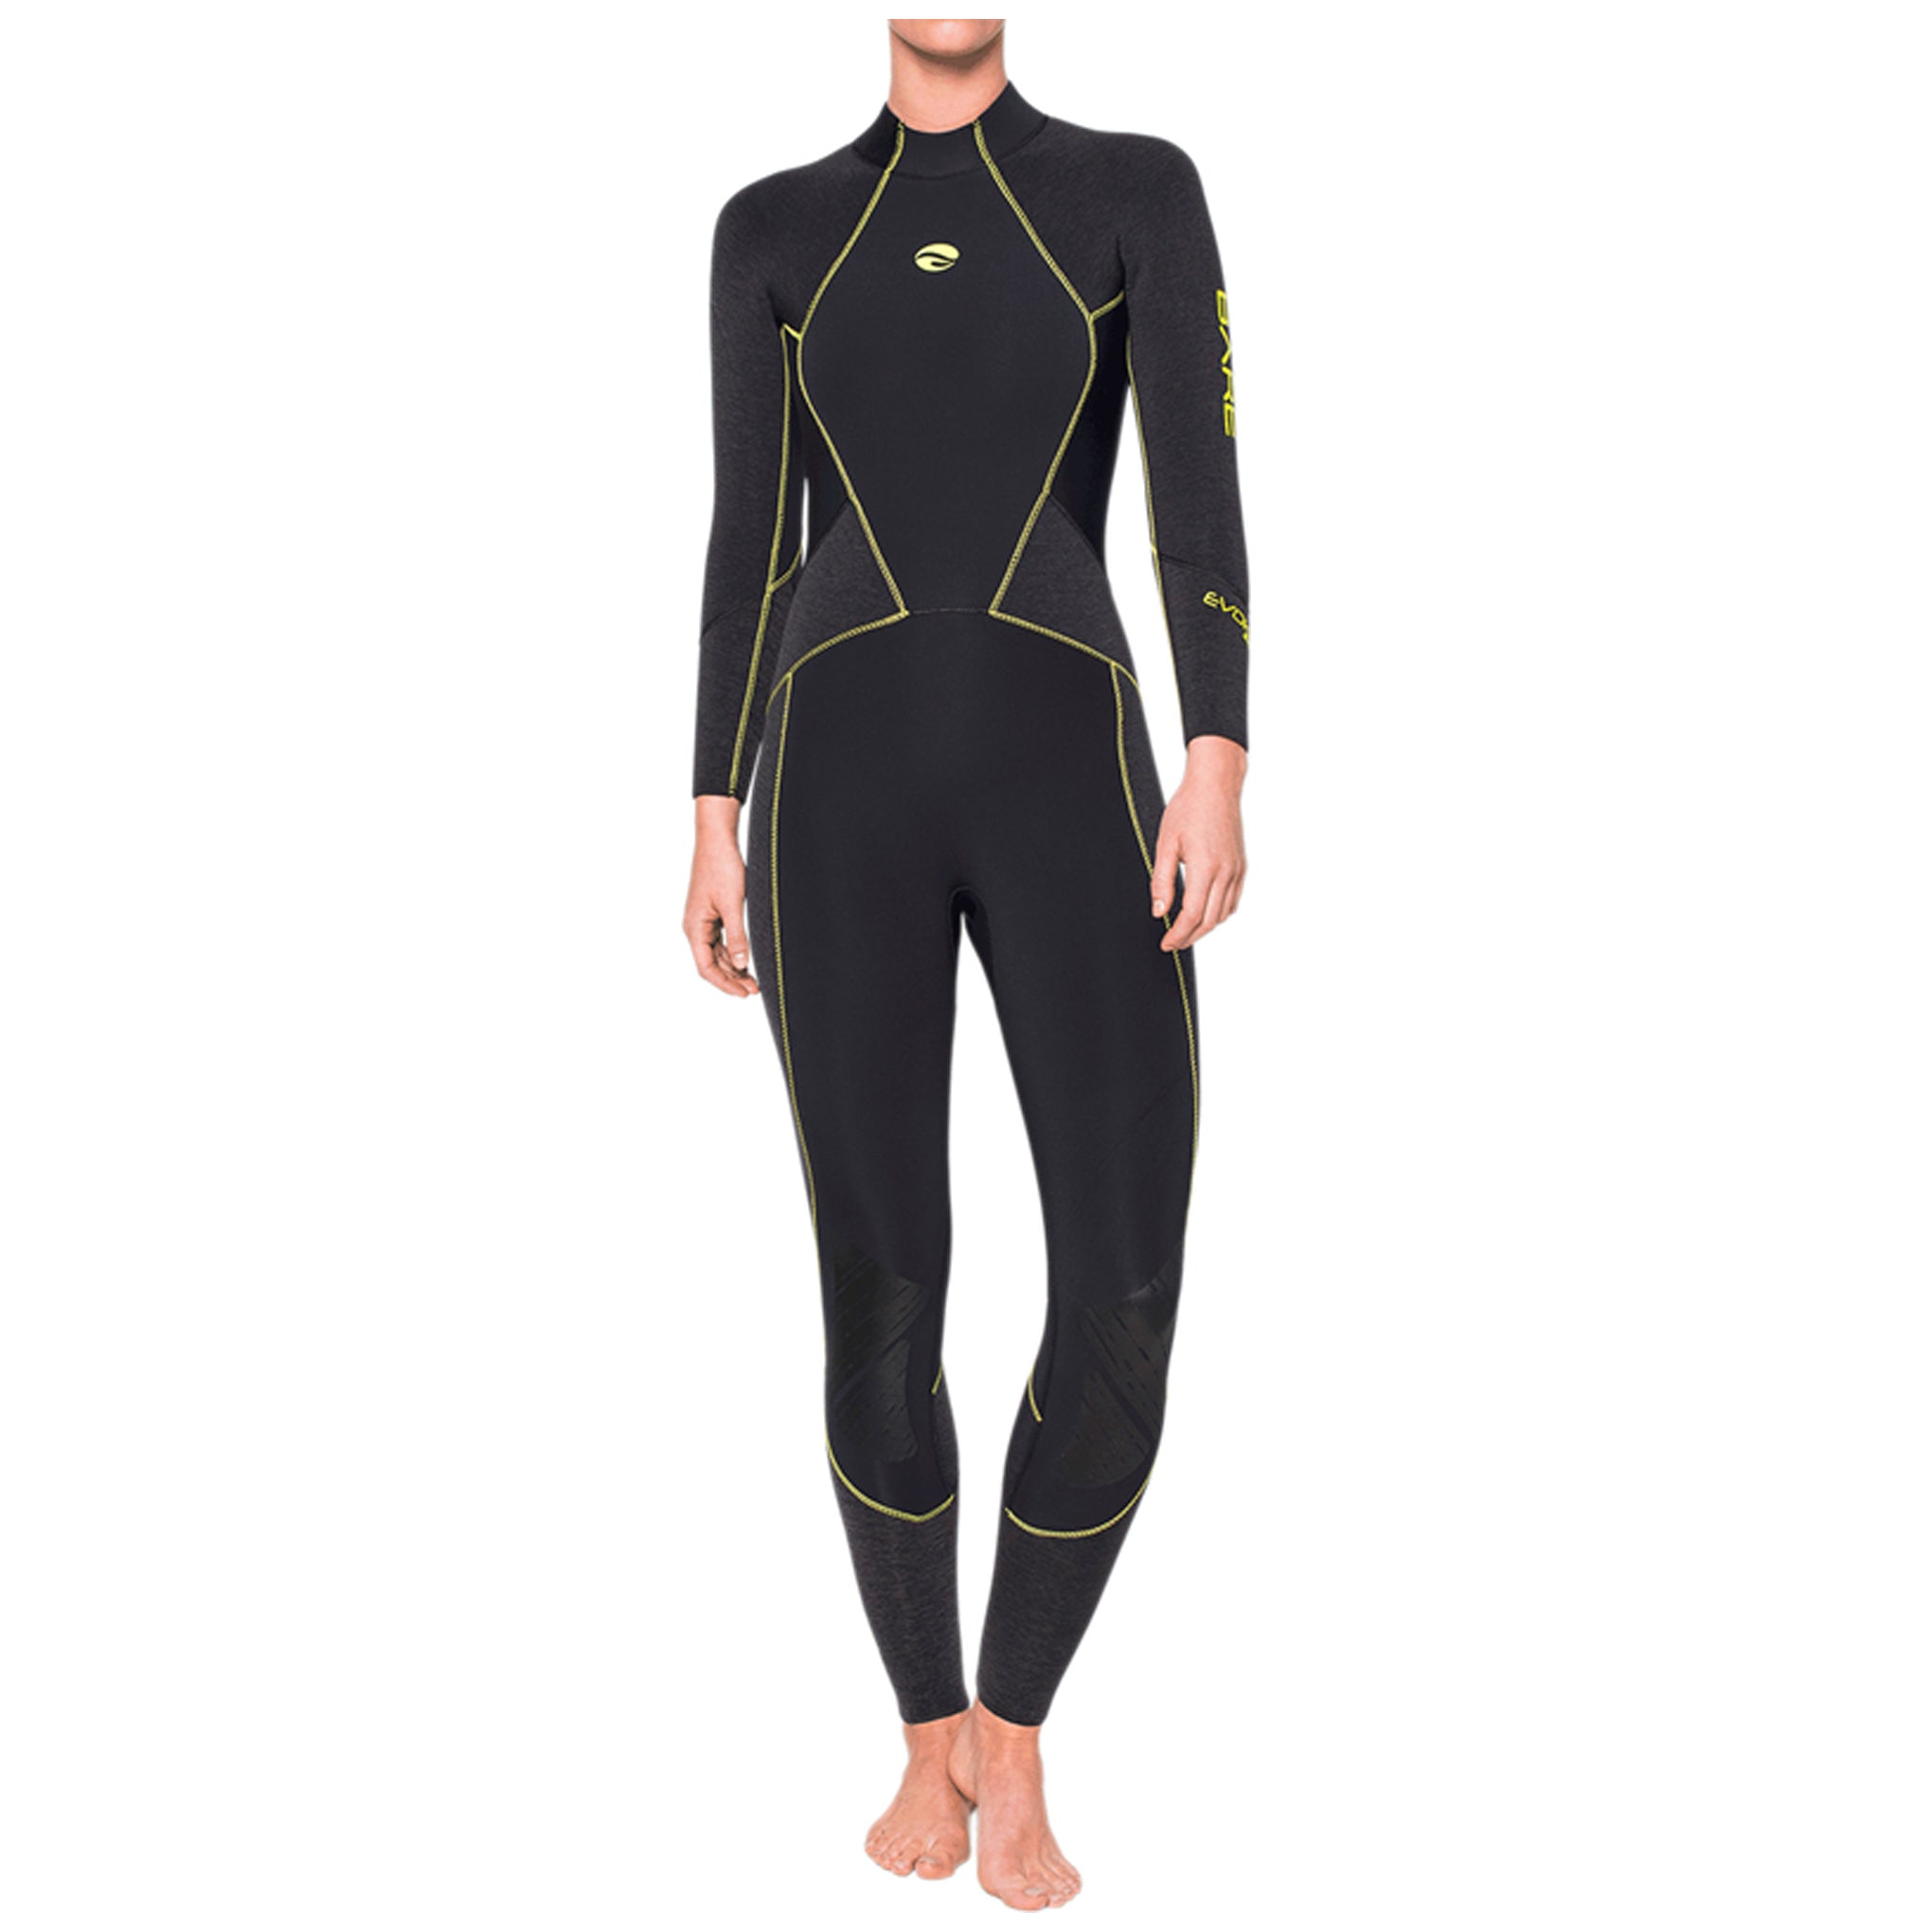 BARE Reactive Wetsuit (3mm, 5mm, 7mm)